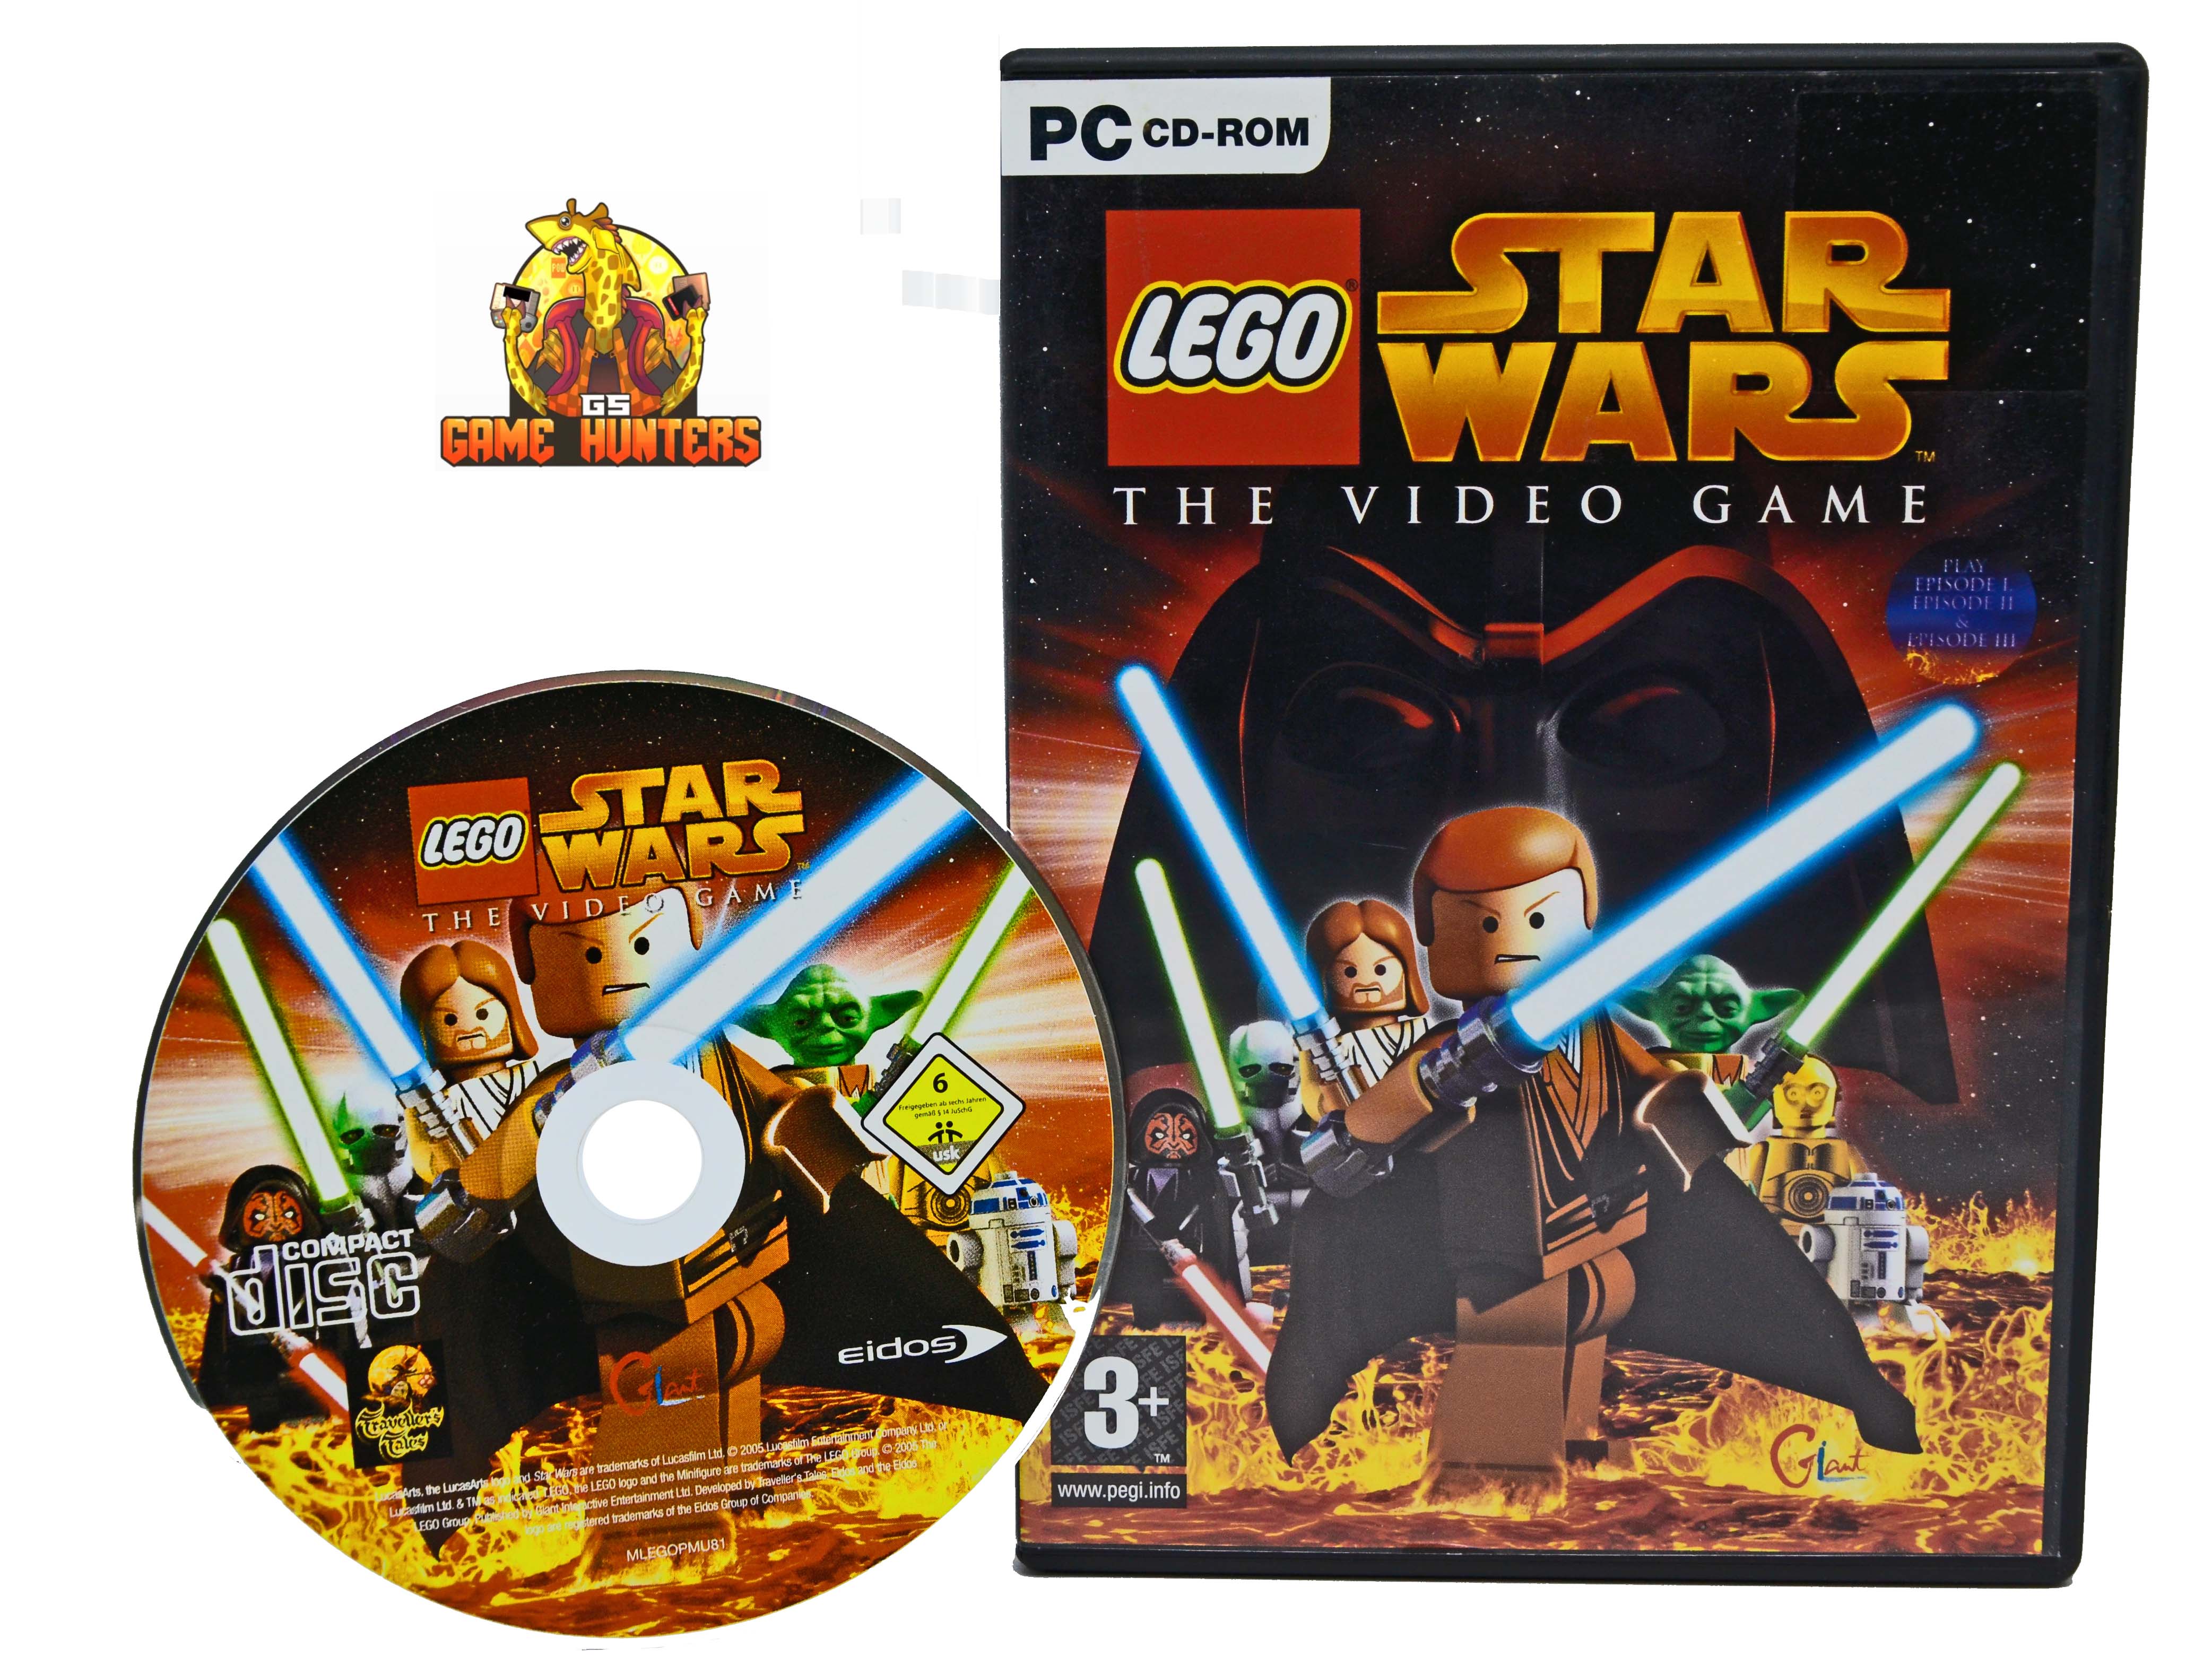 LEGO Star Wars The Video Game Case & Disc.jpg  by GSGAMEHUNTERS